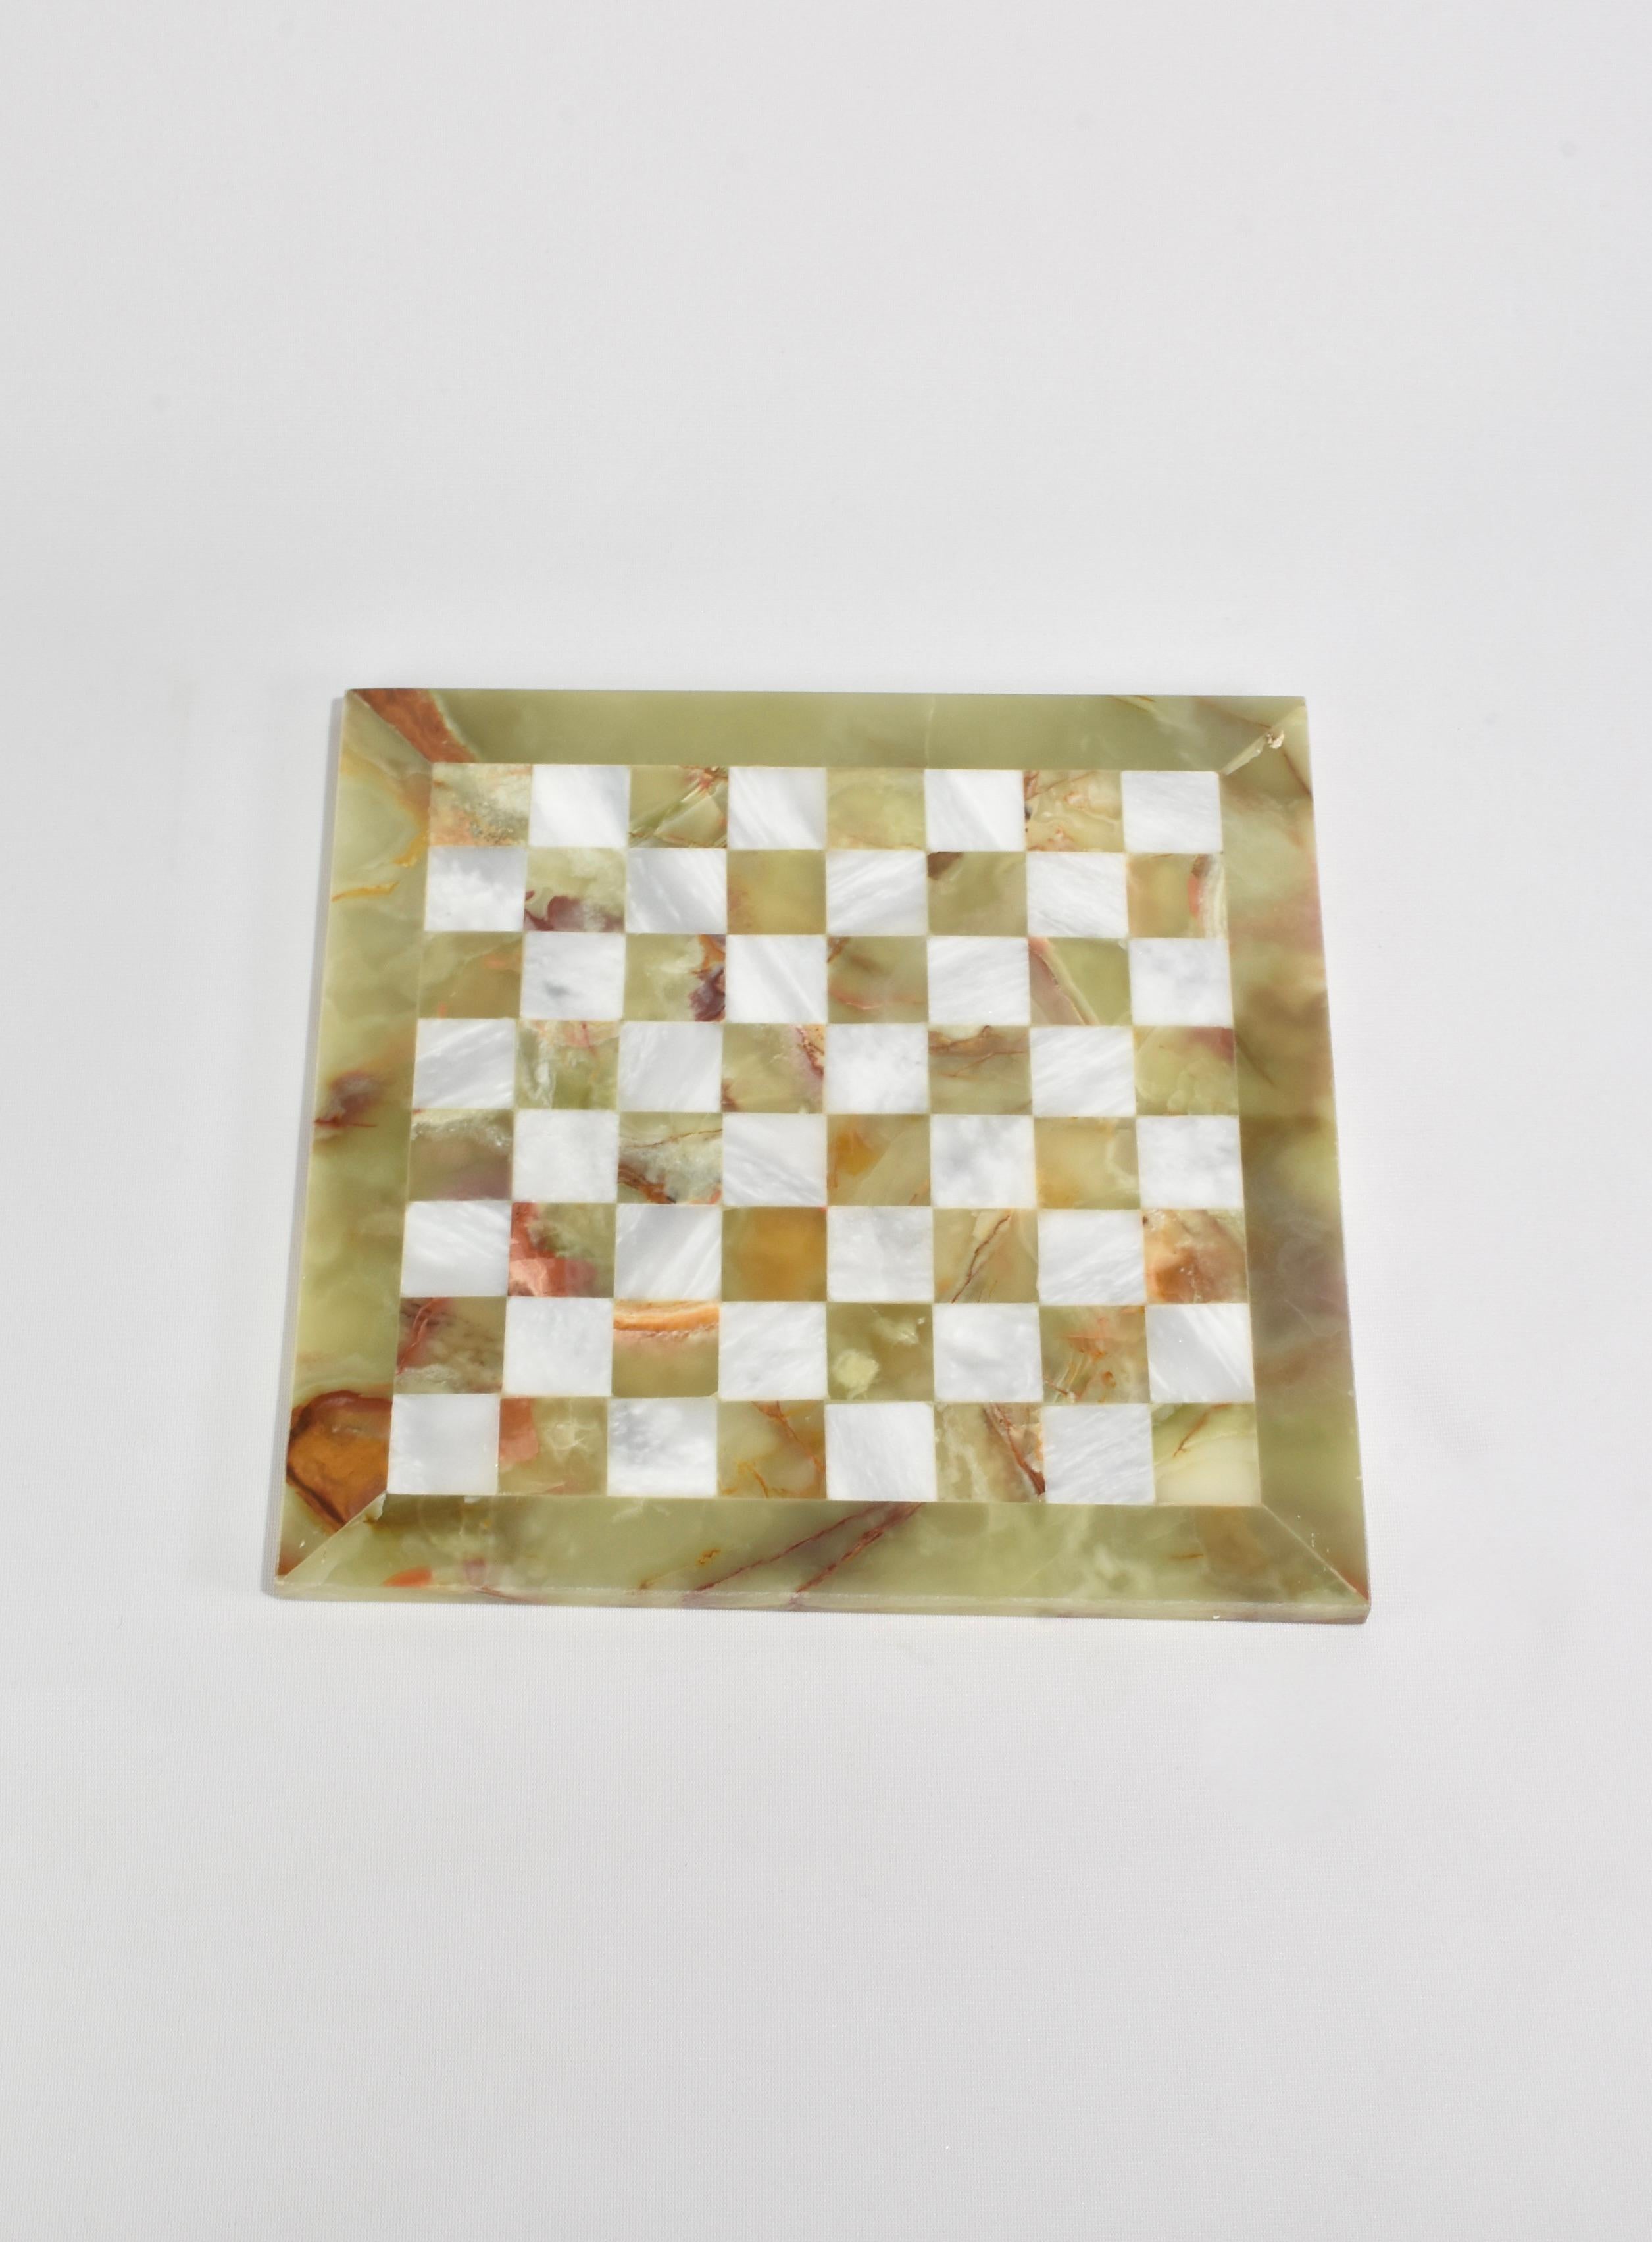 Stunning, white marble and green onyx chess set with hand-carved pieces. Includes board and 32 pieces.

Please note: There are three chess sets available with slight variations in stone coloring. You will receive this one or a very similar